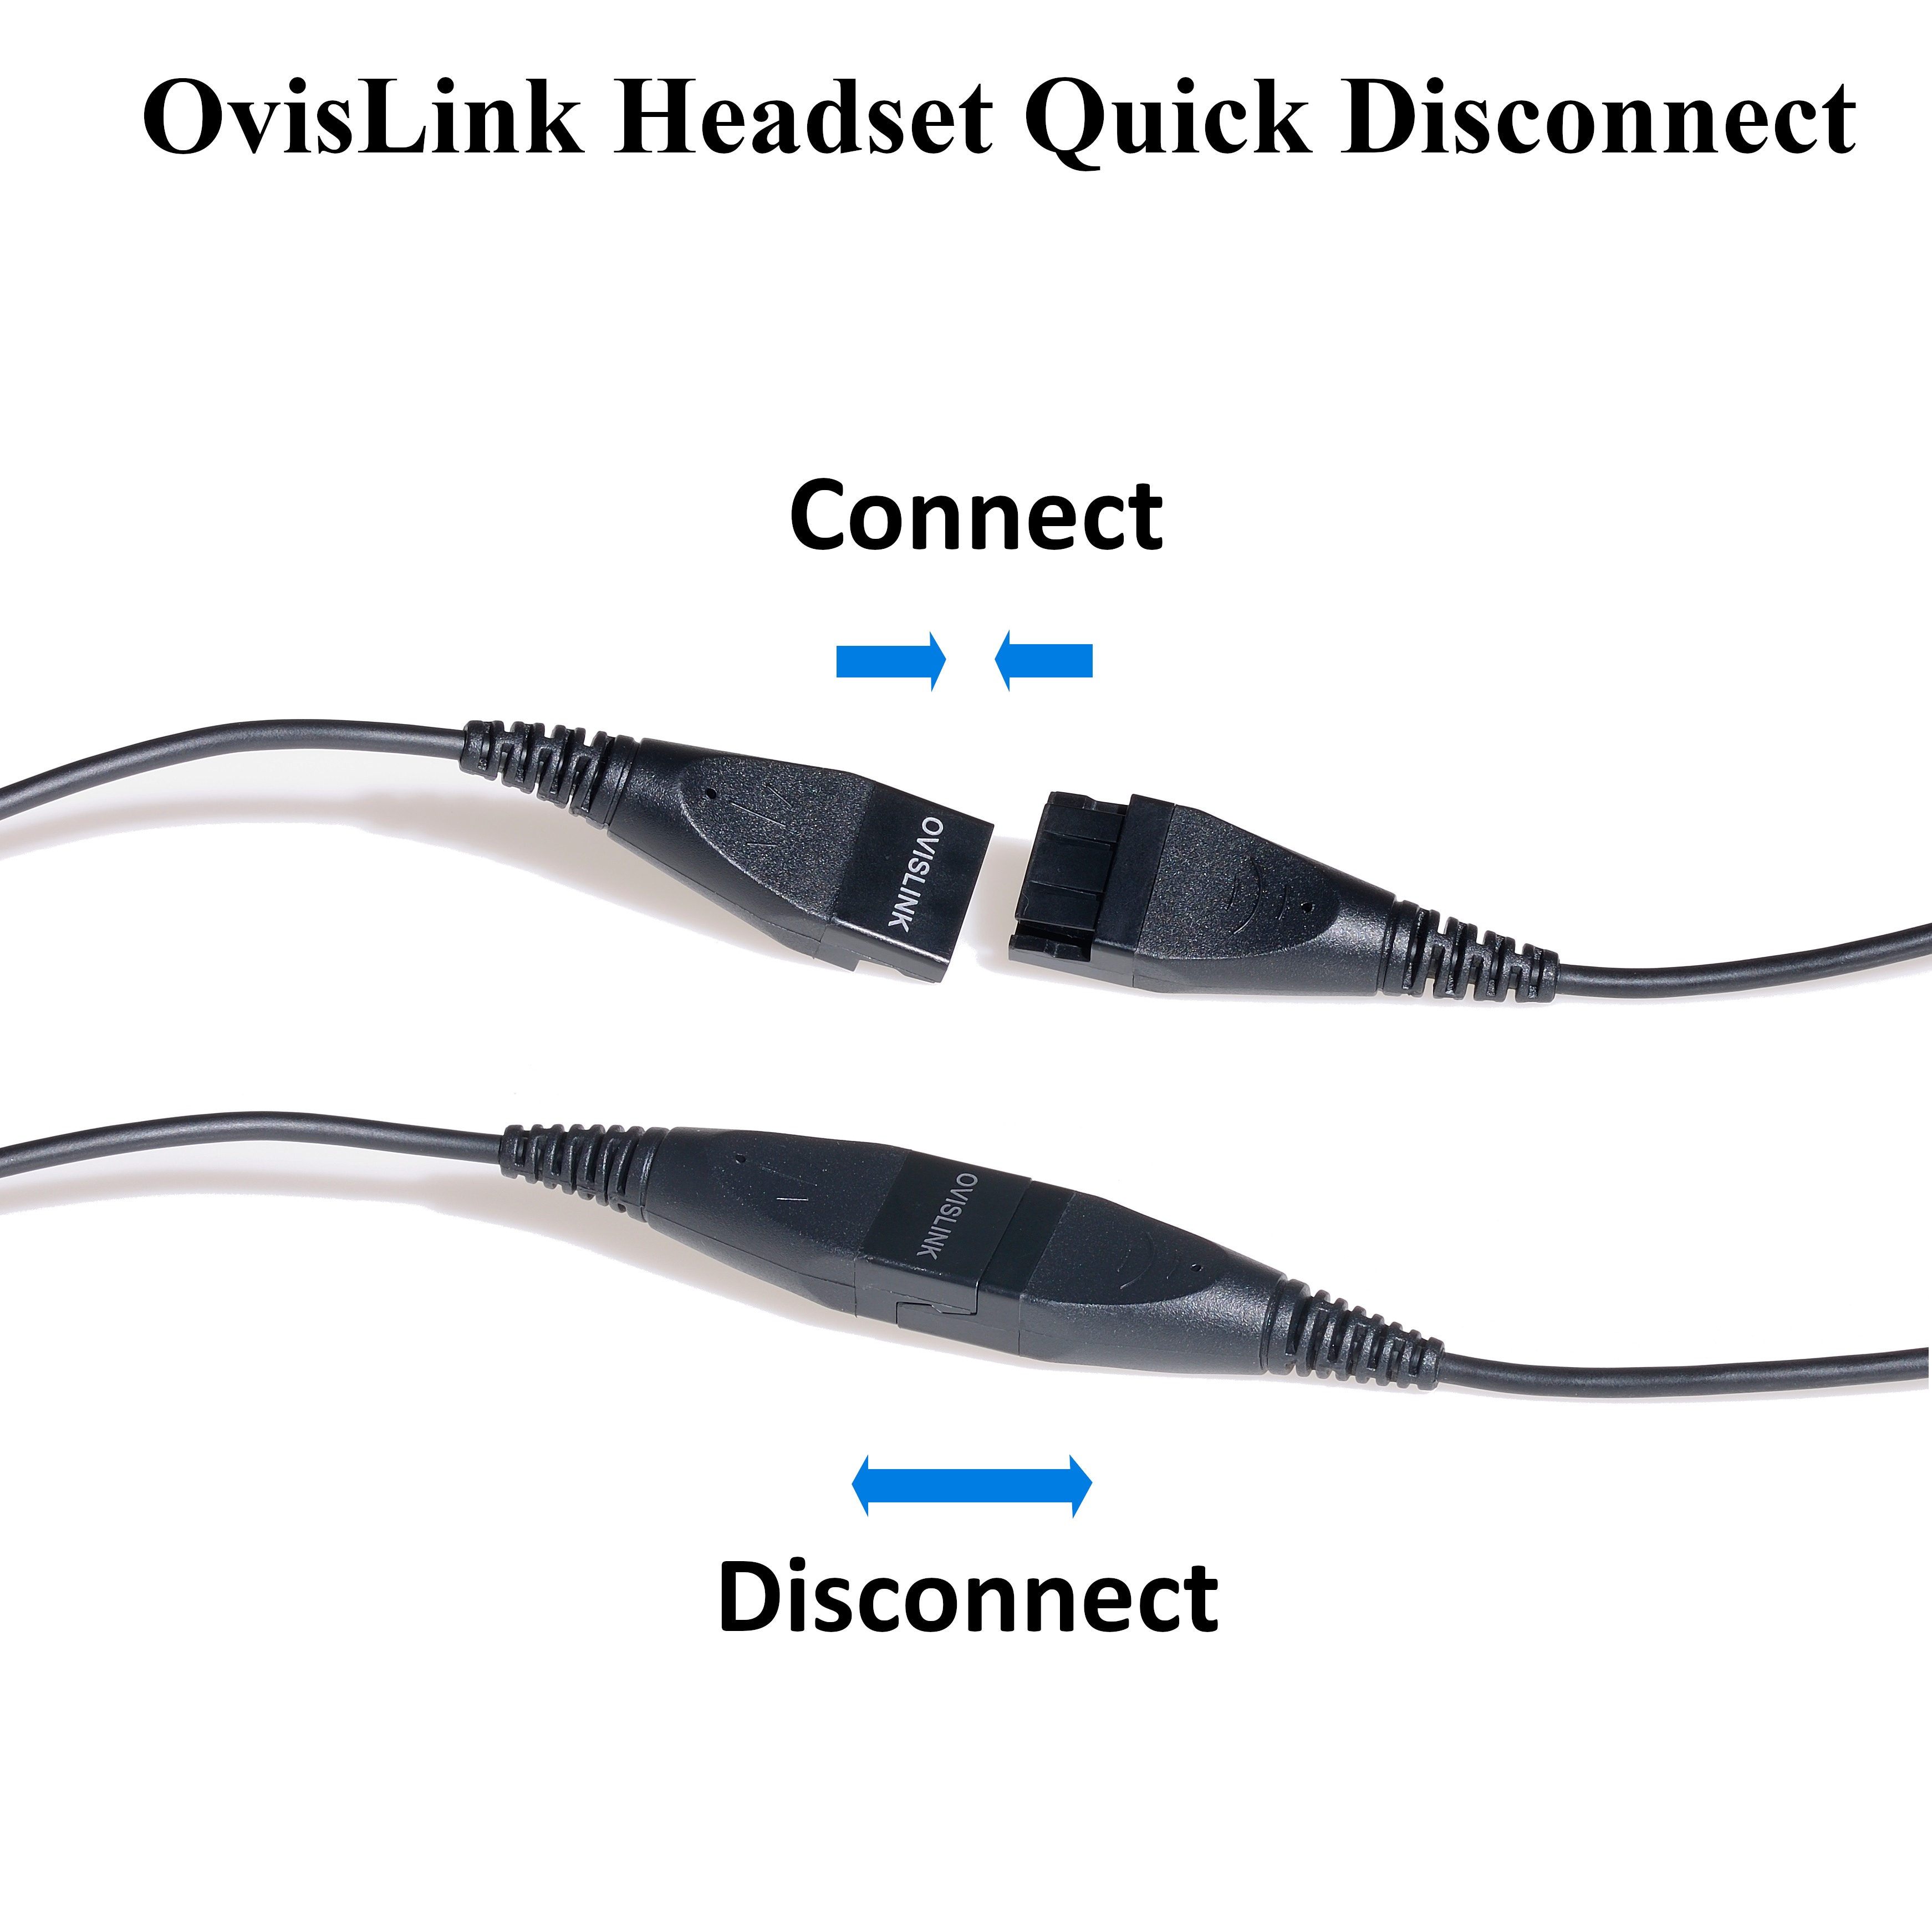 OvisLink Headset Quick Disconnect Function msmall